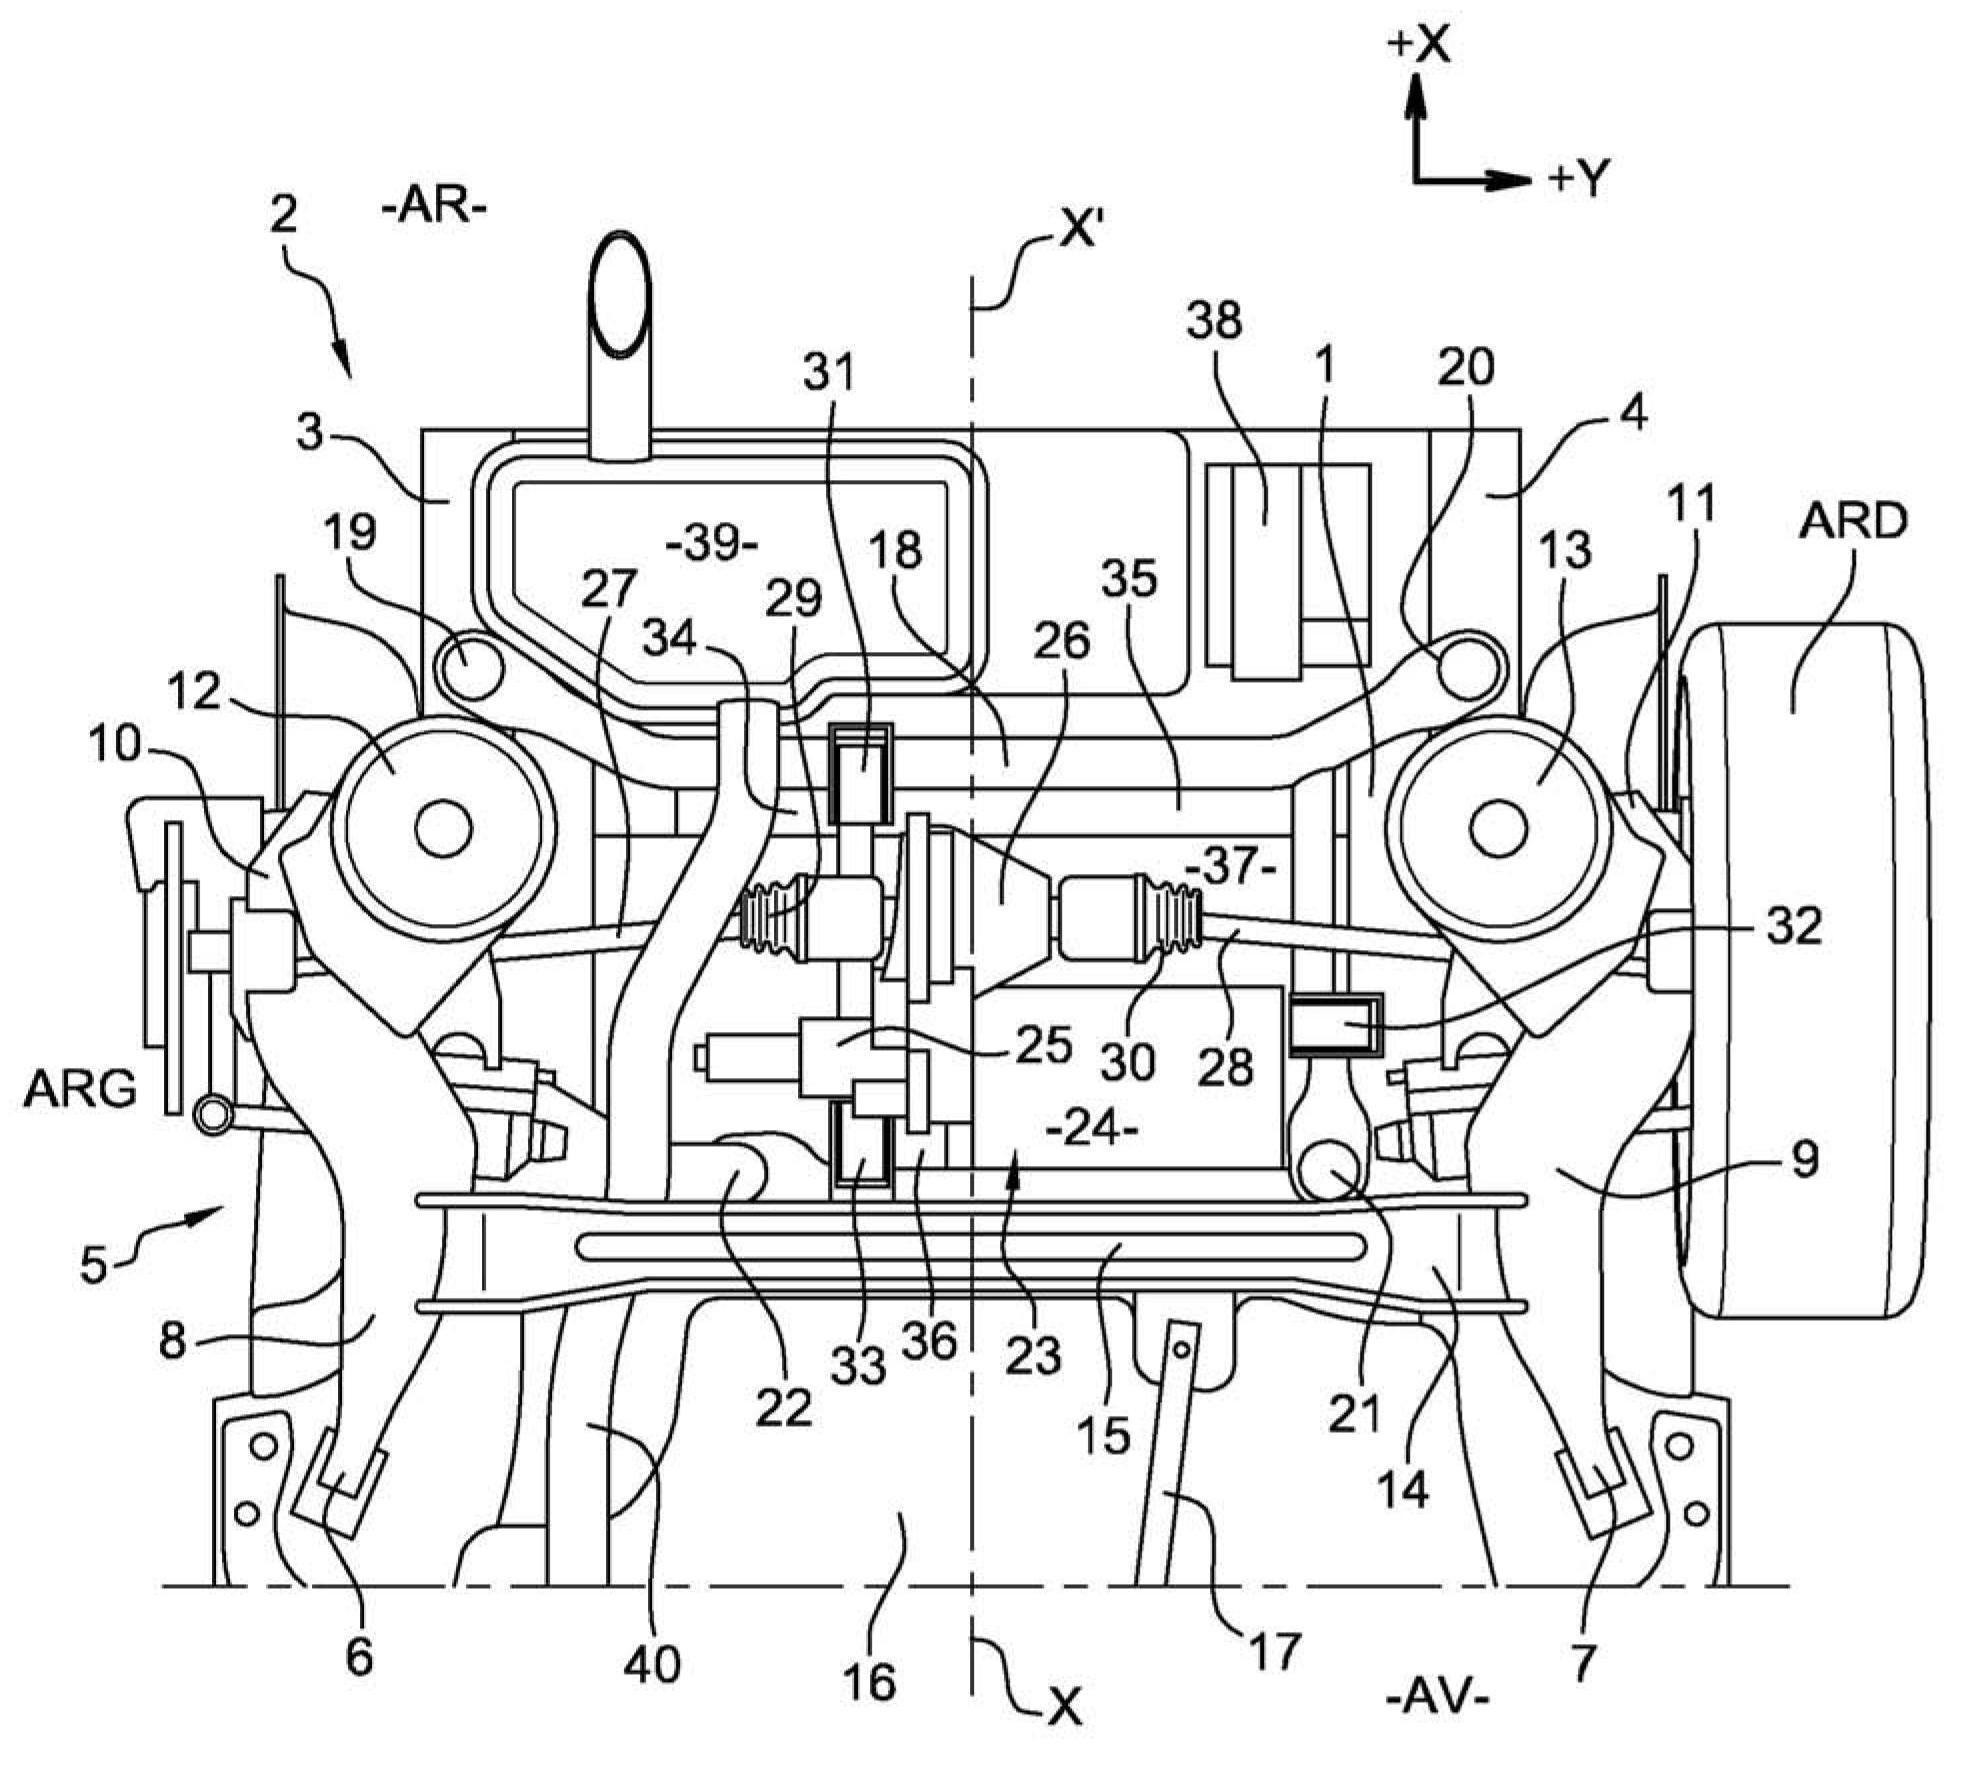 Motor vehicle having an electromotive unit and the power supply module thereof arranged in the vicinity of a running gear of the vehicle